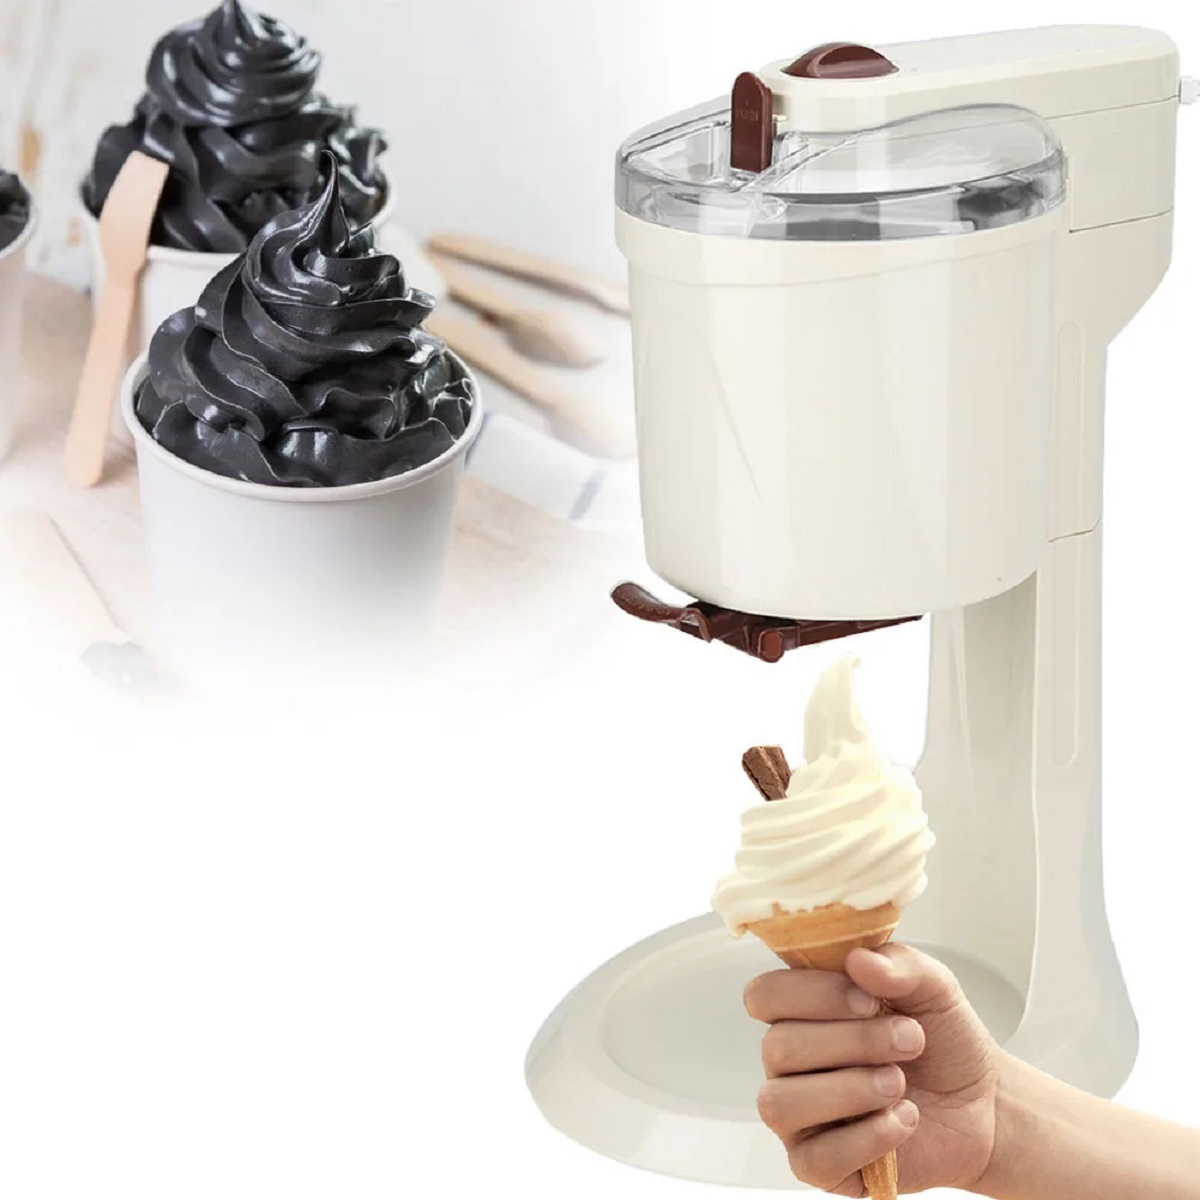 How To Make Soft Serve Ice Cream In A Home Ice Cream Maker